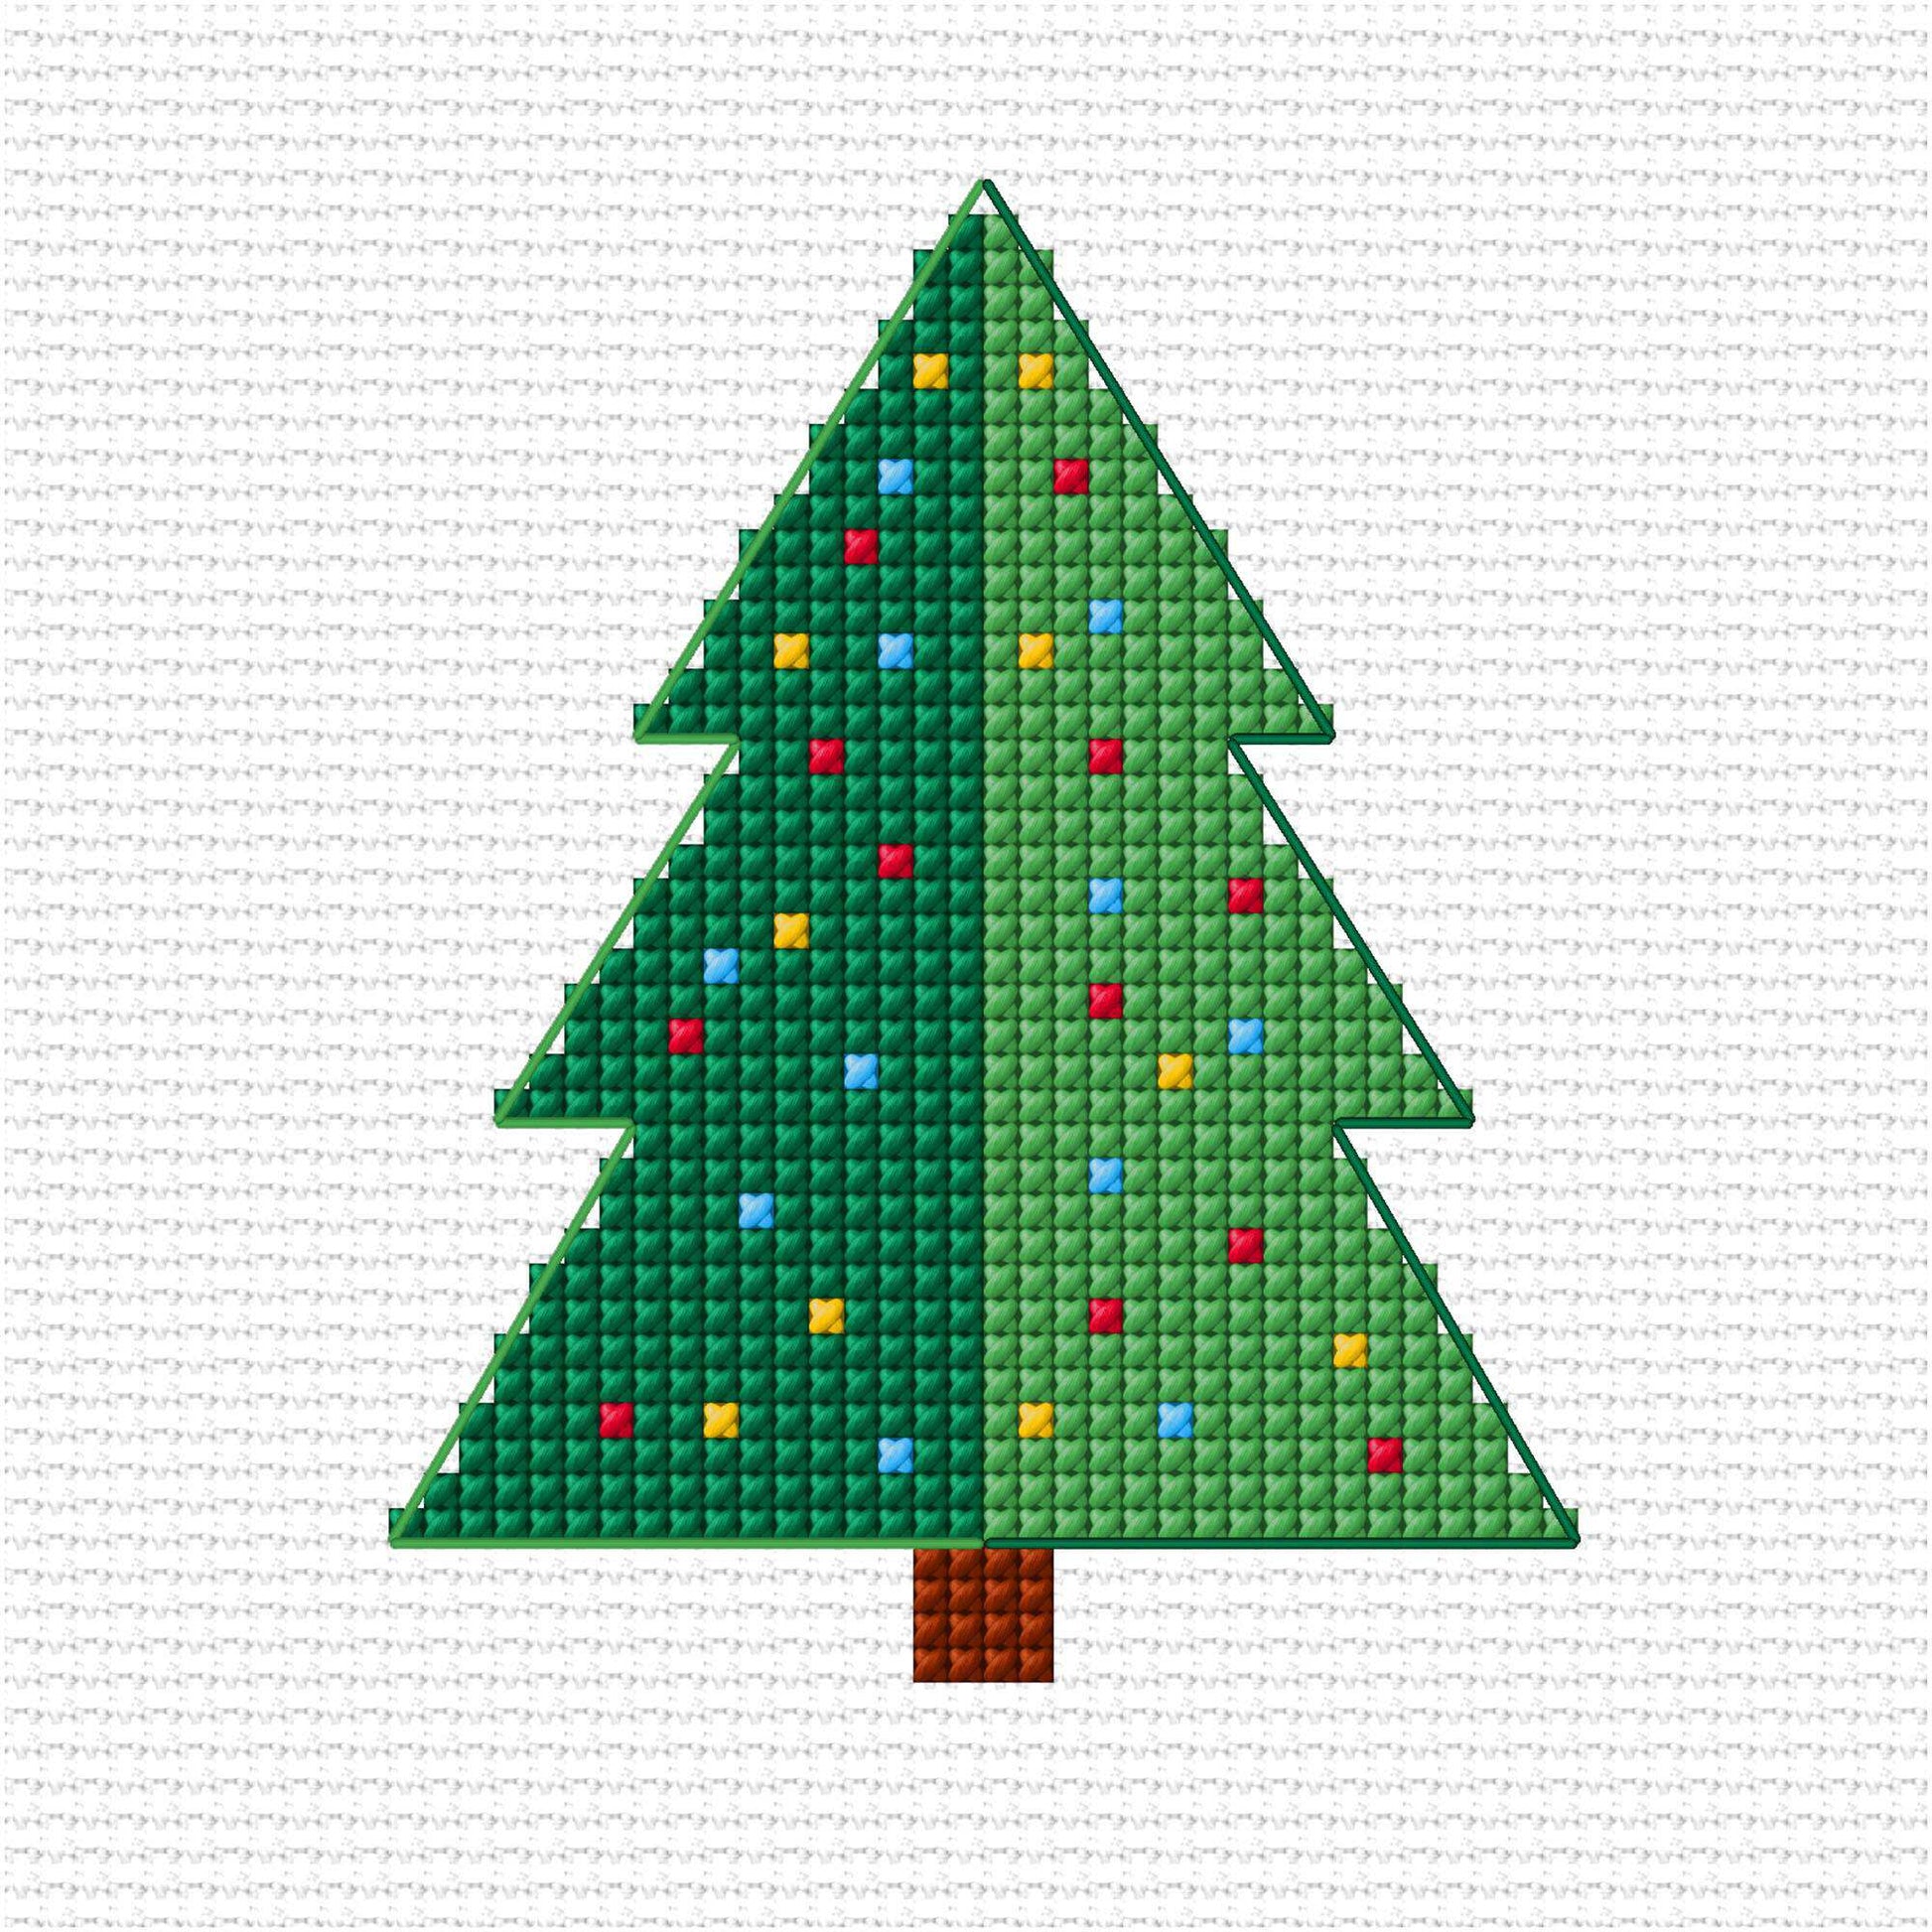 Free Anchor Embroidery Christmas Tree Cross Stitch Pattern